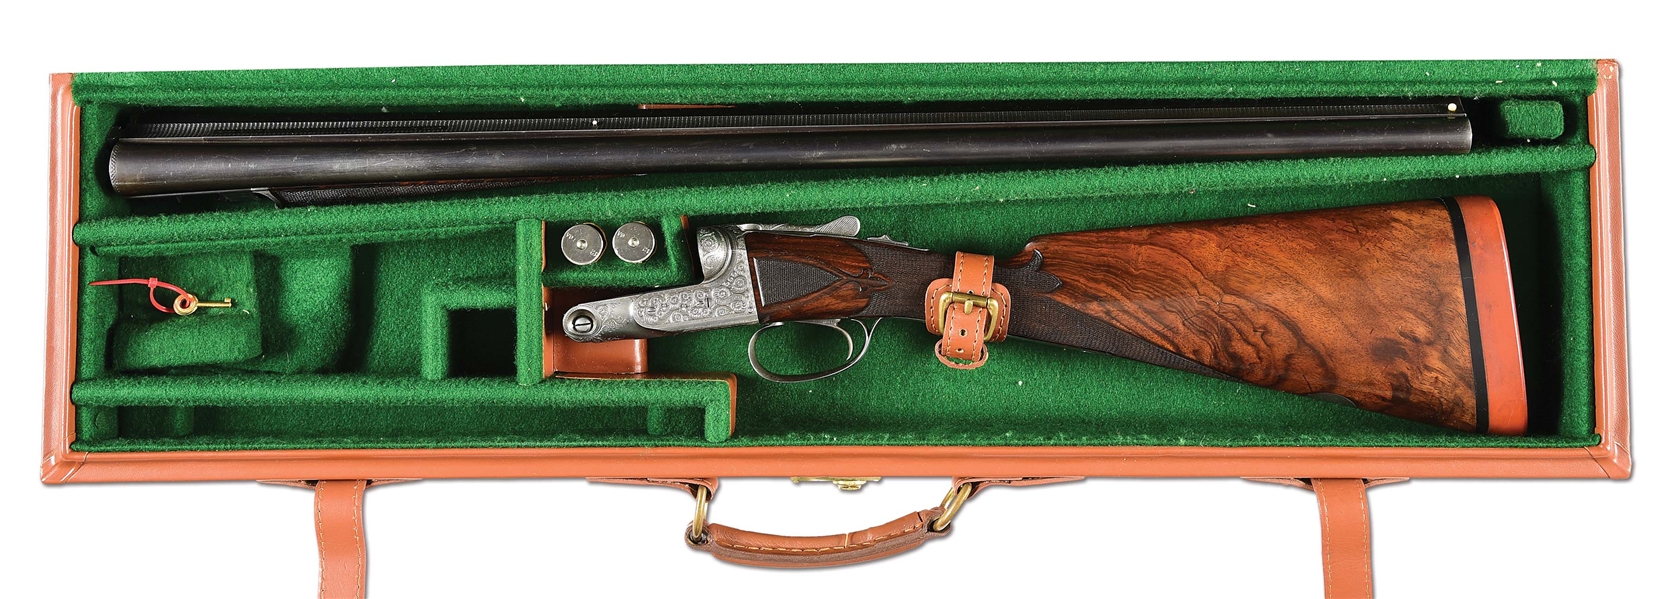 (C) SCARCE PARKER BHE 12 BORE SHOTGUN WITH CASE SOLD BY A.W. DU BRAY.